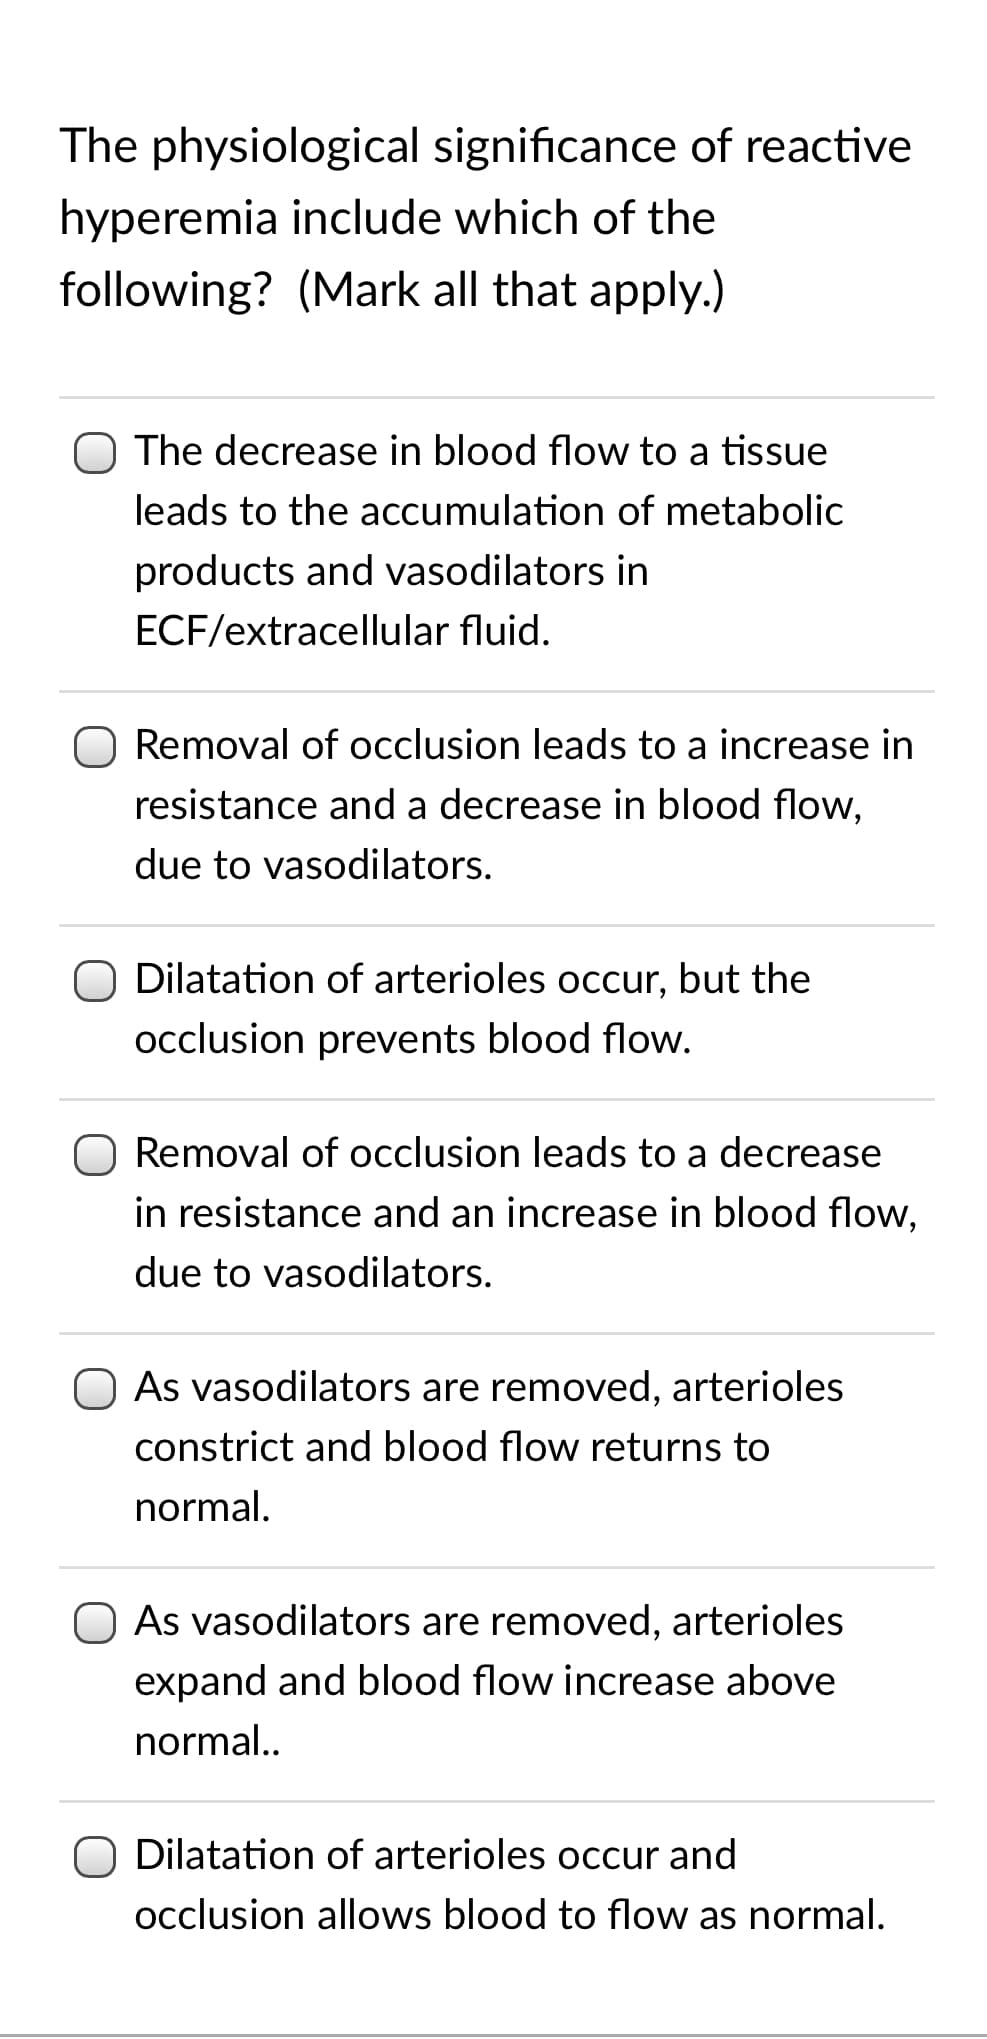 The physiological significance of reactive
hyperemia include which of the
following? (Mark all that apply.)
O The decrease in blood flow to a tissue
leads to the accumulation of metabolic
products and vasodilators in
ECF/extracellular fluid.
Removal of occlusion leads to a increase in
resistance and a decrease in blood flow,
due to vasodilators.
O Dilatation of arterioles occur, but the
occlusion prevents blood flow.
Removal of occlusion leads to a decrease
in resistance and an increase in blood flow,
due to vasodilators.
As vasodilators are removed, arterioles
constrict and blood flow returns to
normal.
As vasodilators are removed, arterioles
expand and blood flow increase above
normal..
Dilatation of arterioles occur and
occlusion allows blood to flow as normal.
